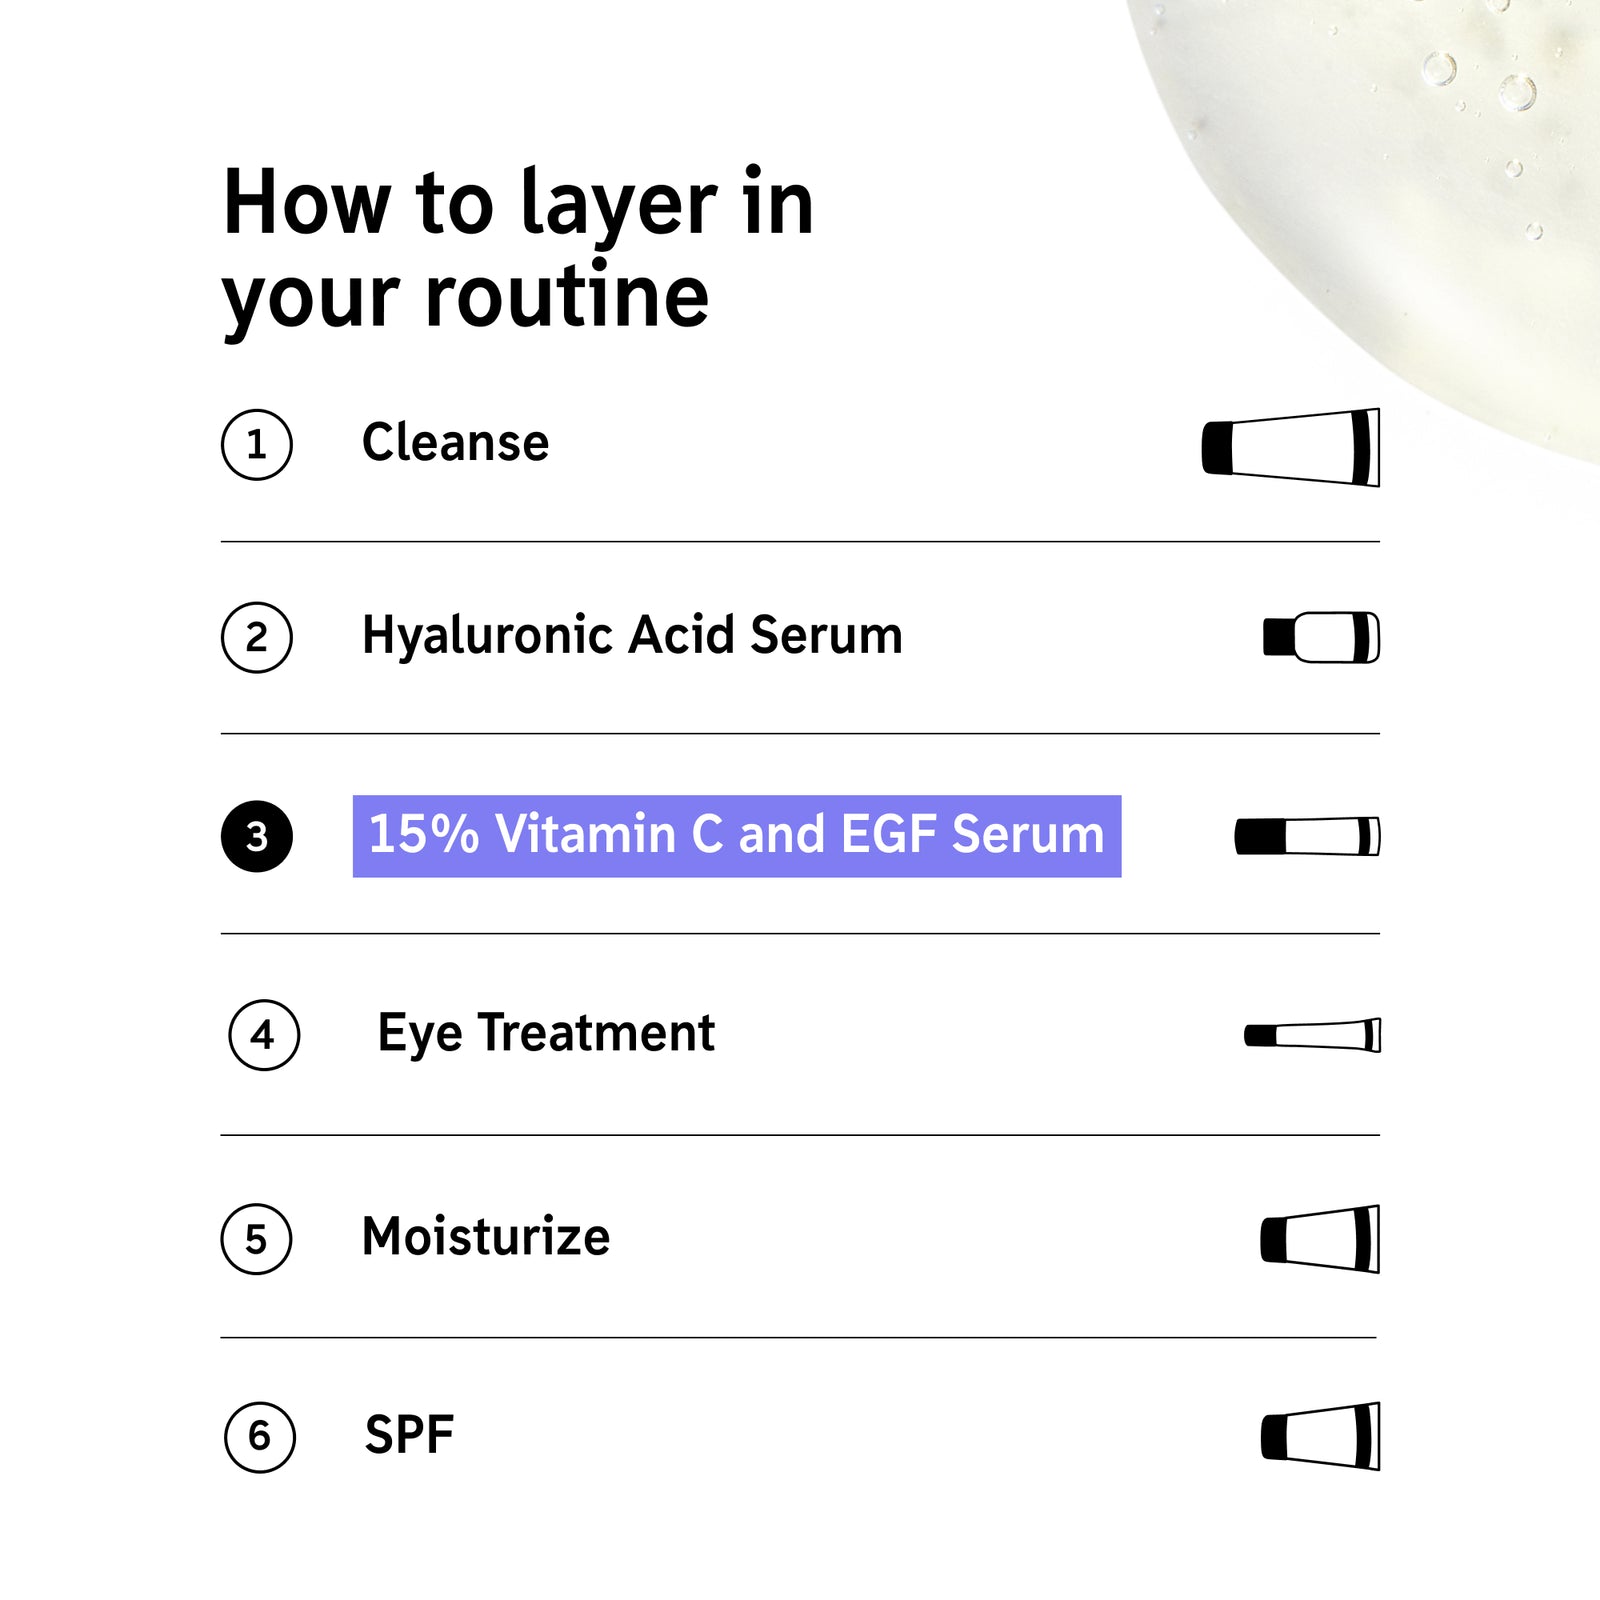 How to layer 15% Vitamin C & EGF Serum in your routine.